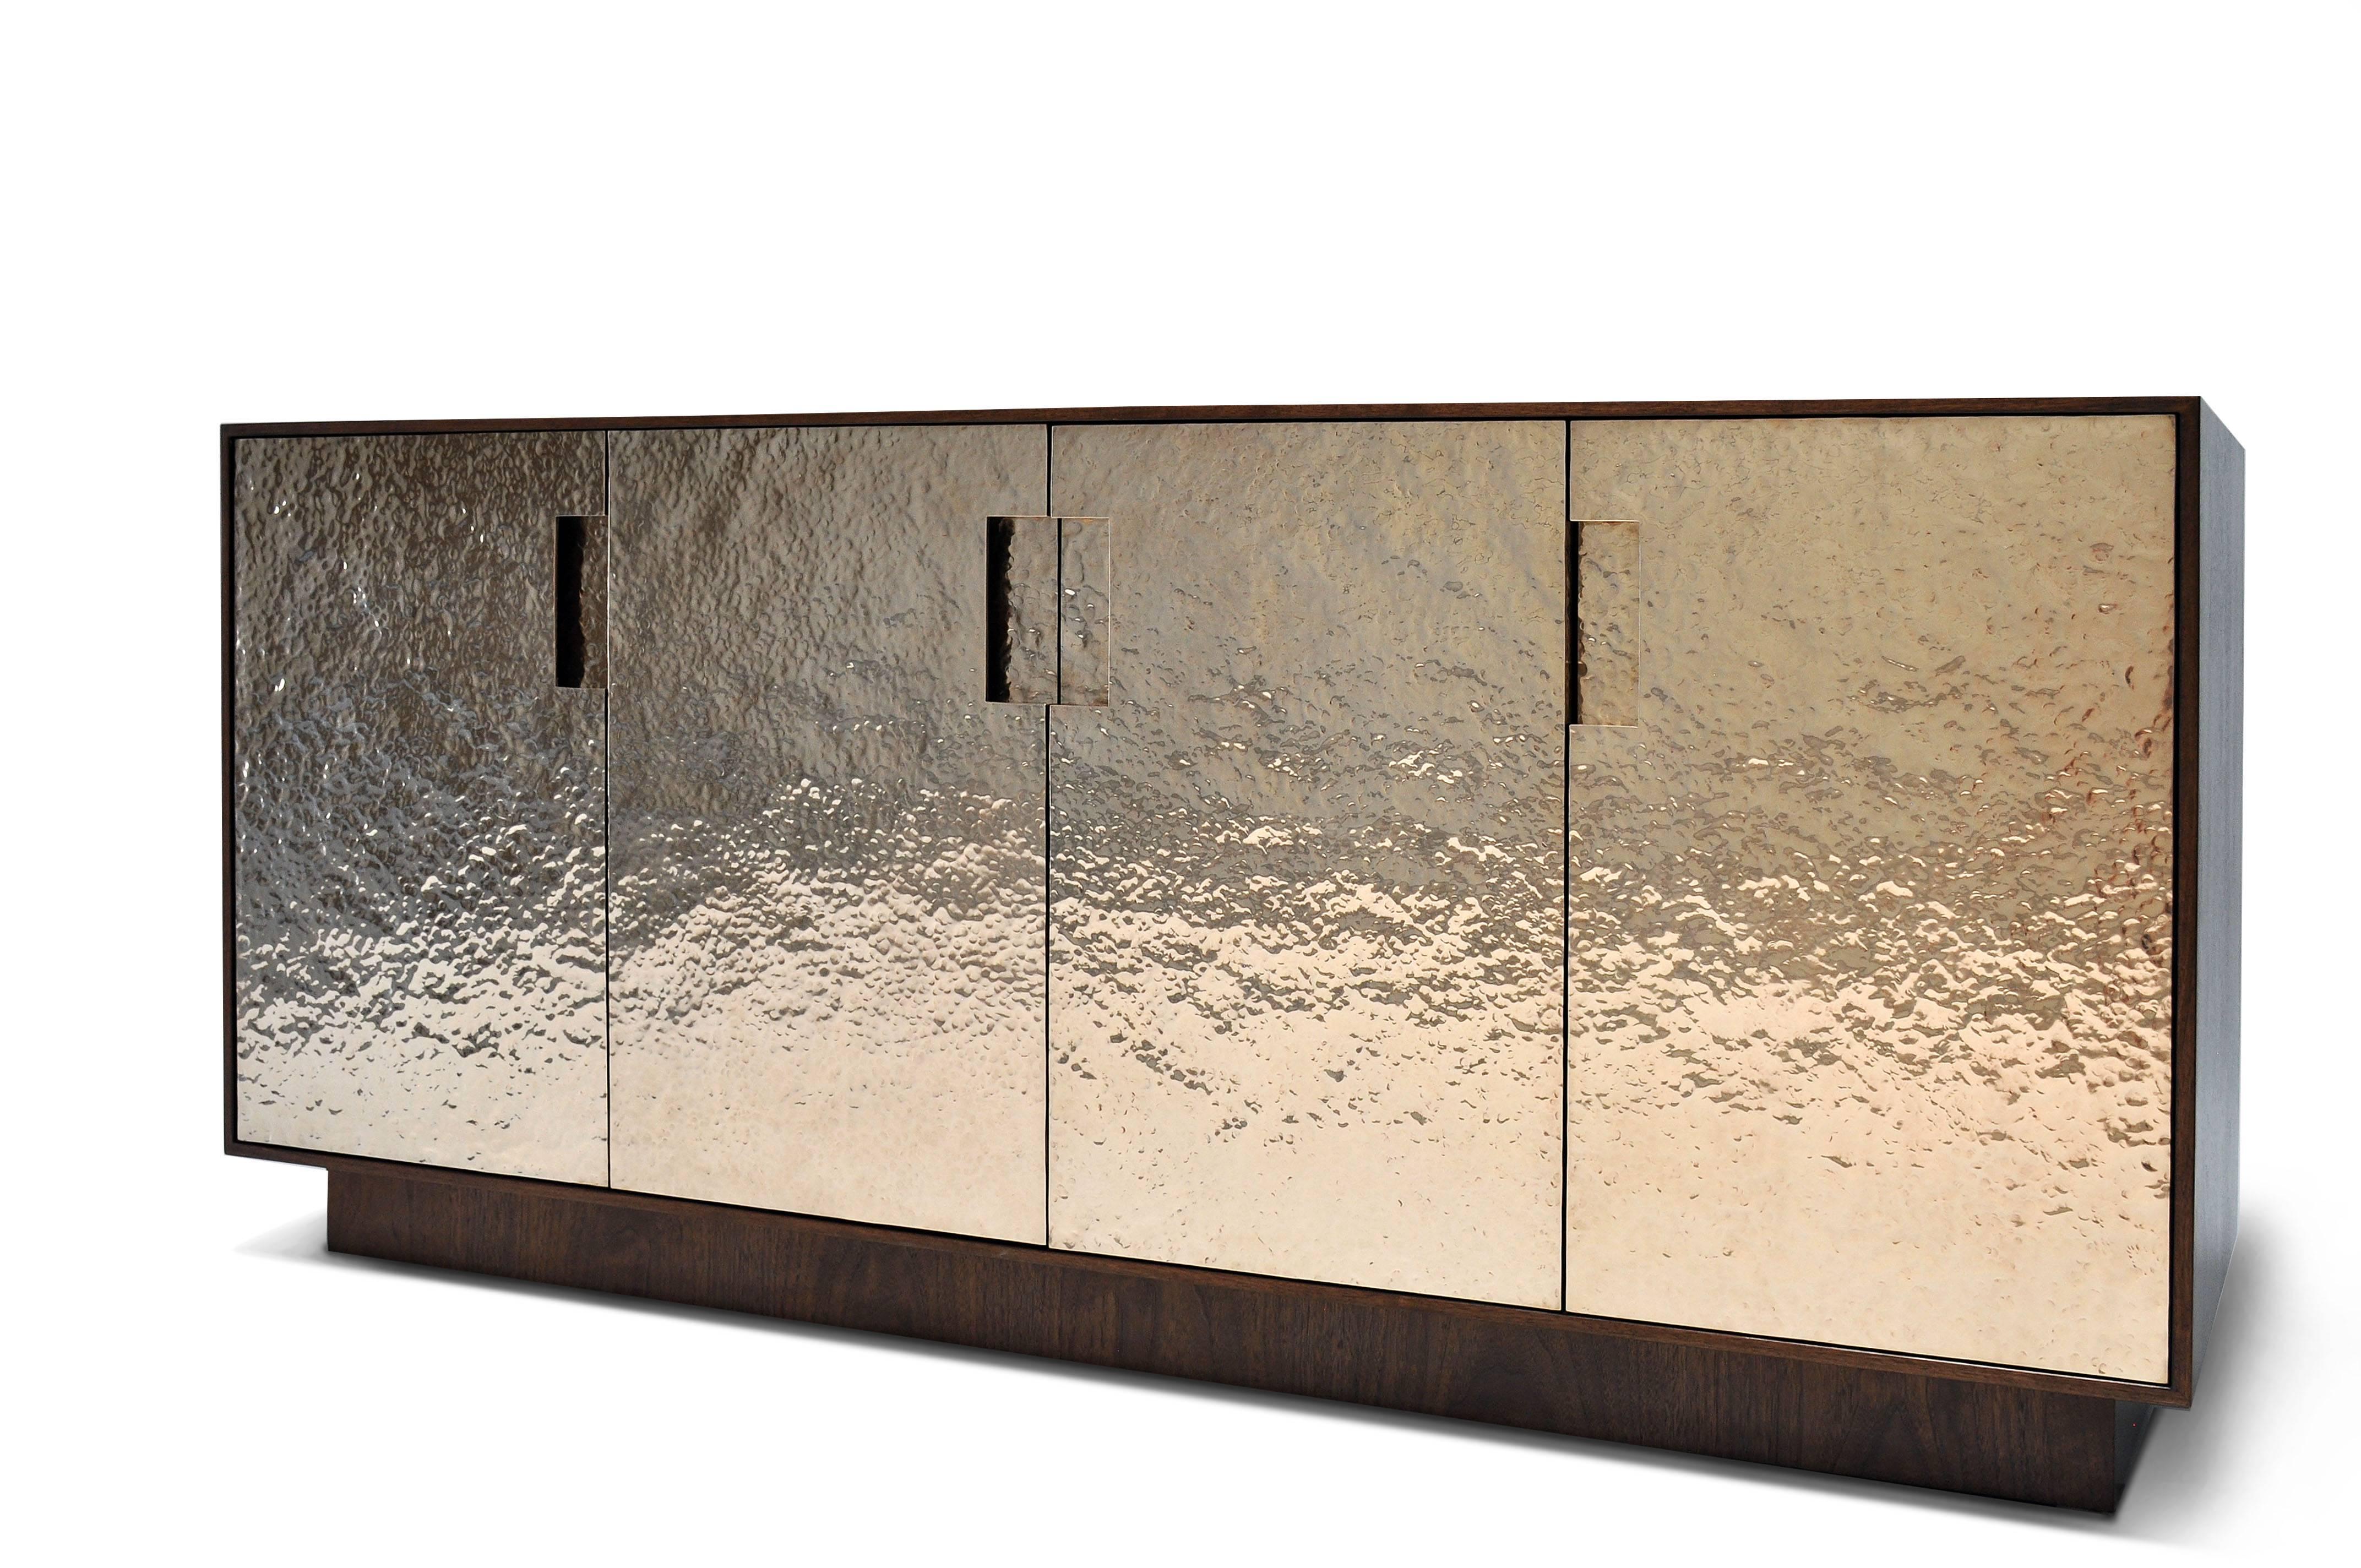 The Pacifica cabinet is created to be a quiet, but substantial presence. The cabinet, base, and interior are American Walnut. The interior configuration is adjustable shelves and drawers behind the doors. The bronze doors are hammered and formed by